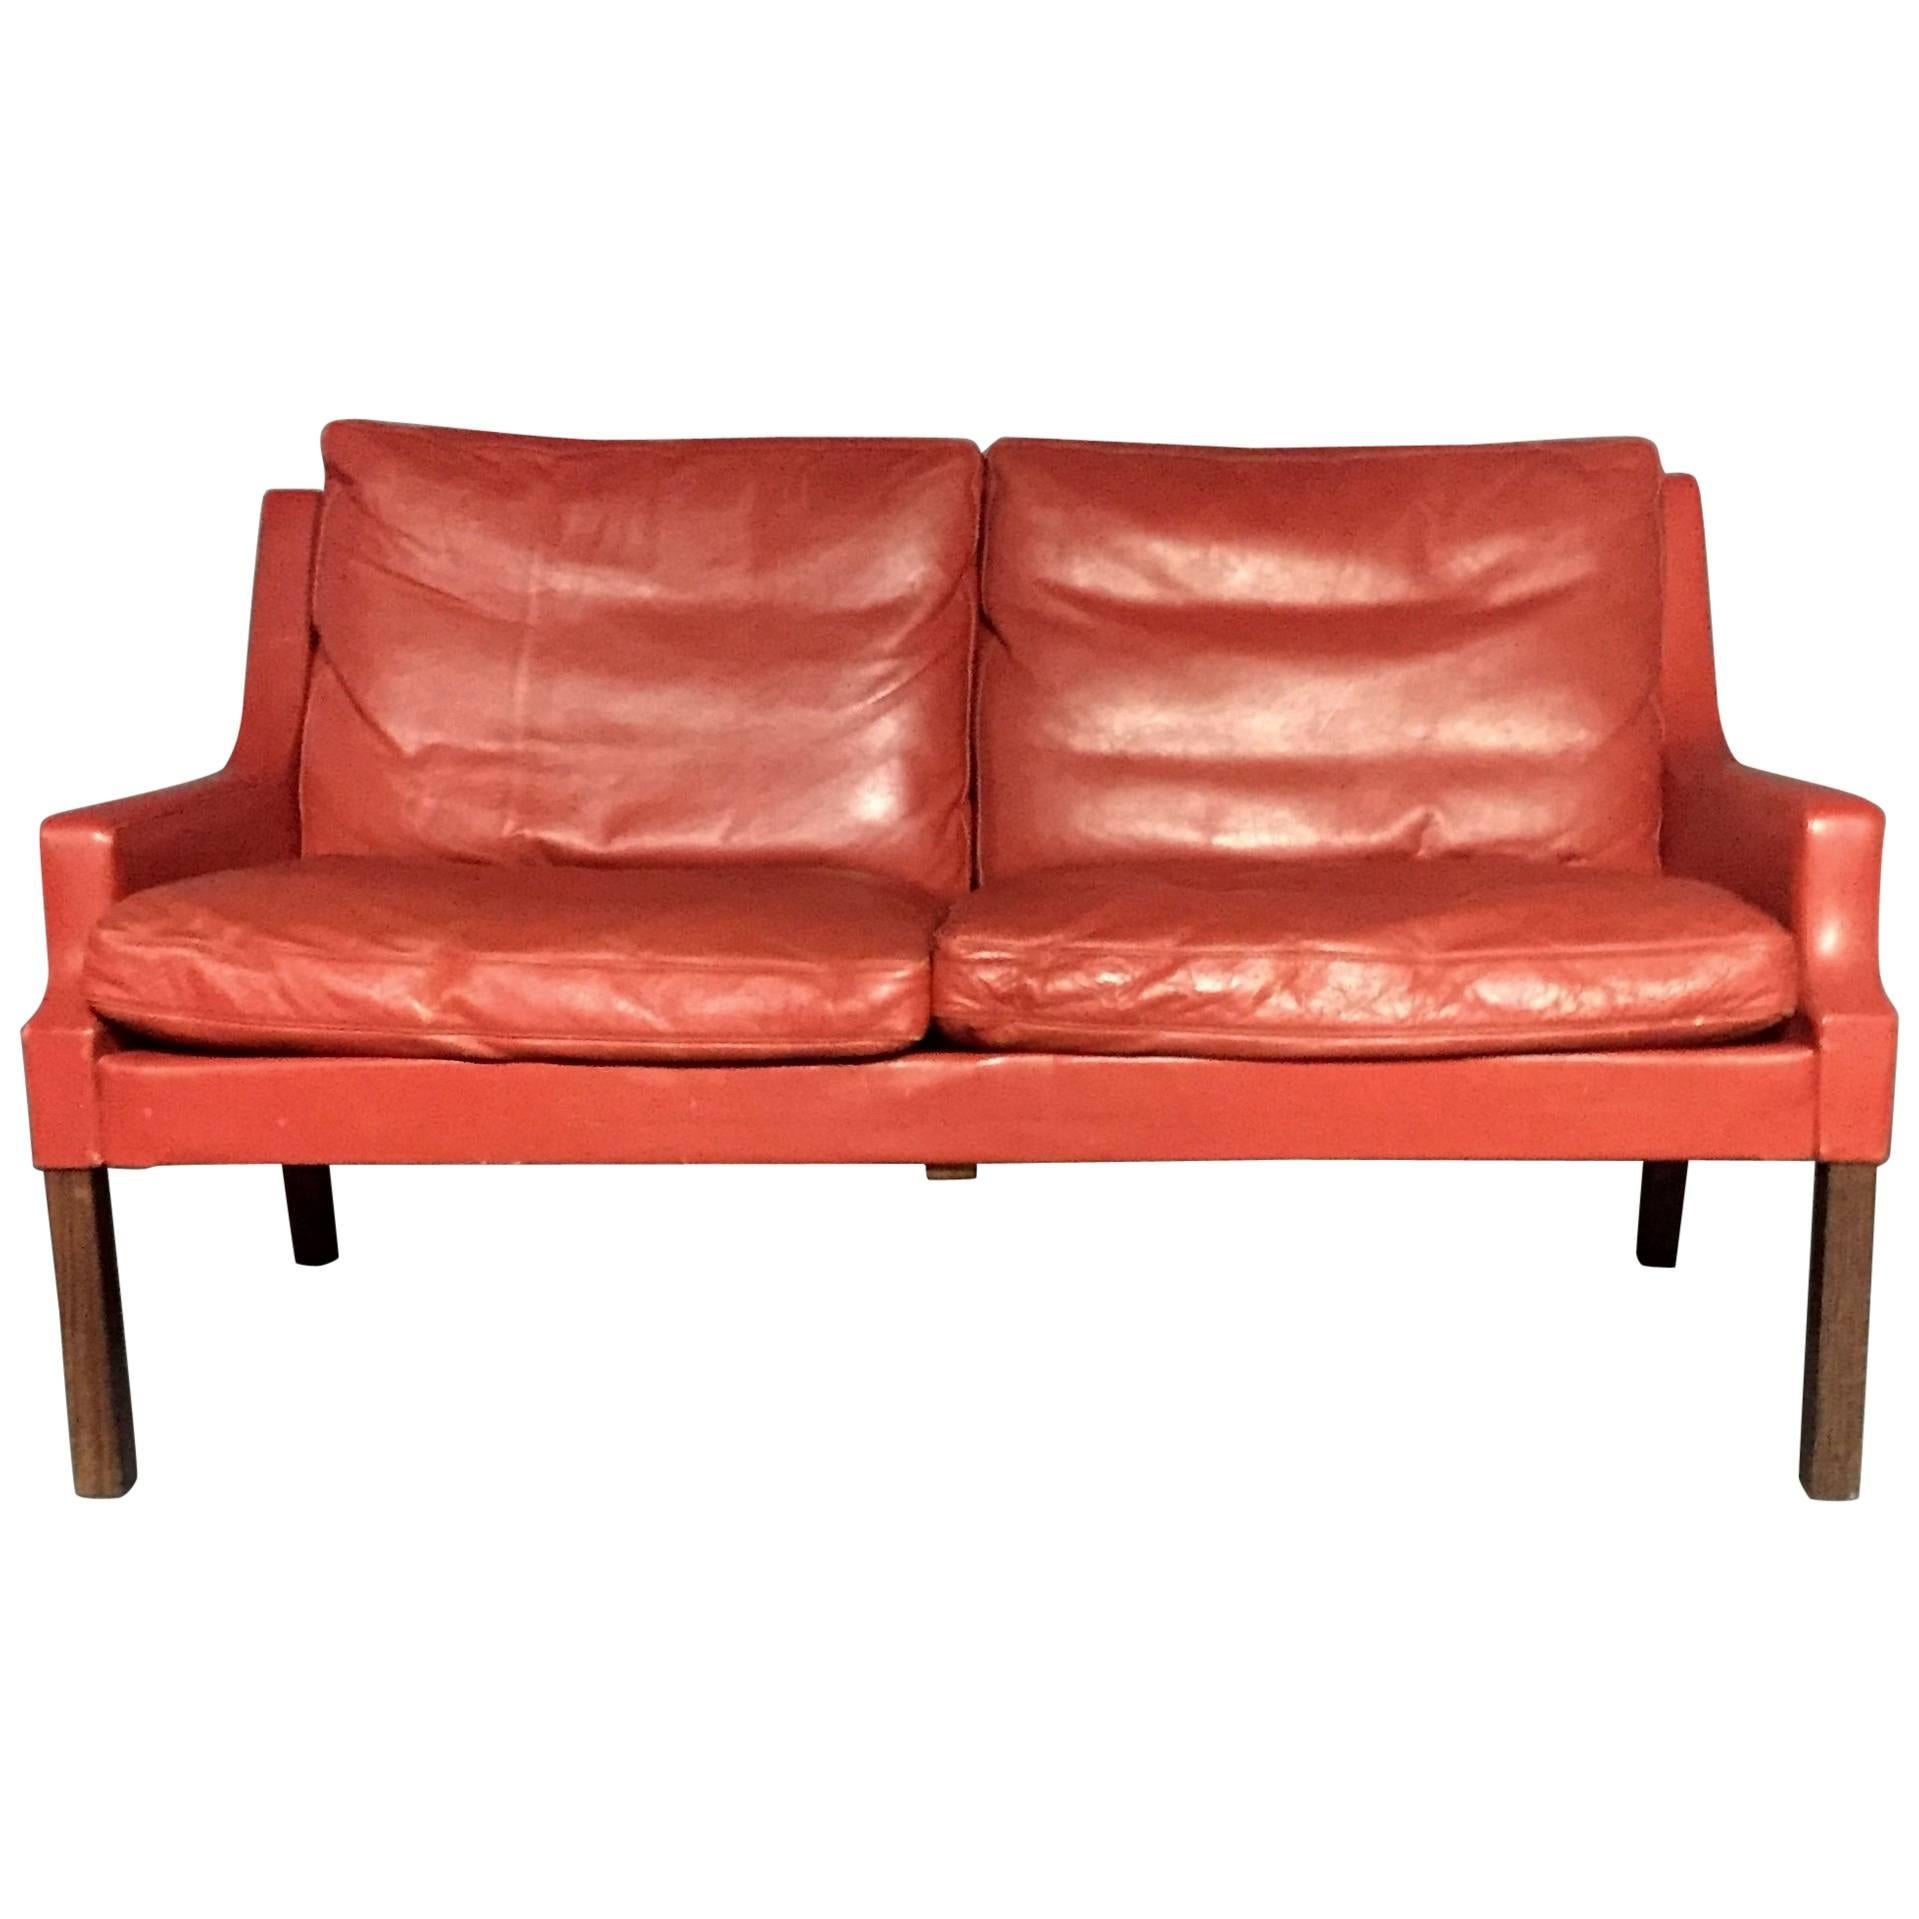 George Thams Red Leather and Rosewood Sofa, Denmark, 1960s